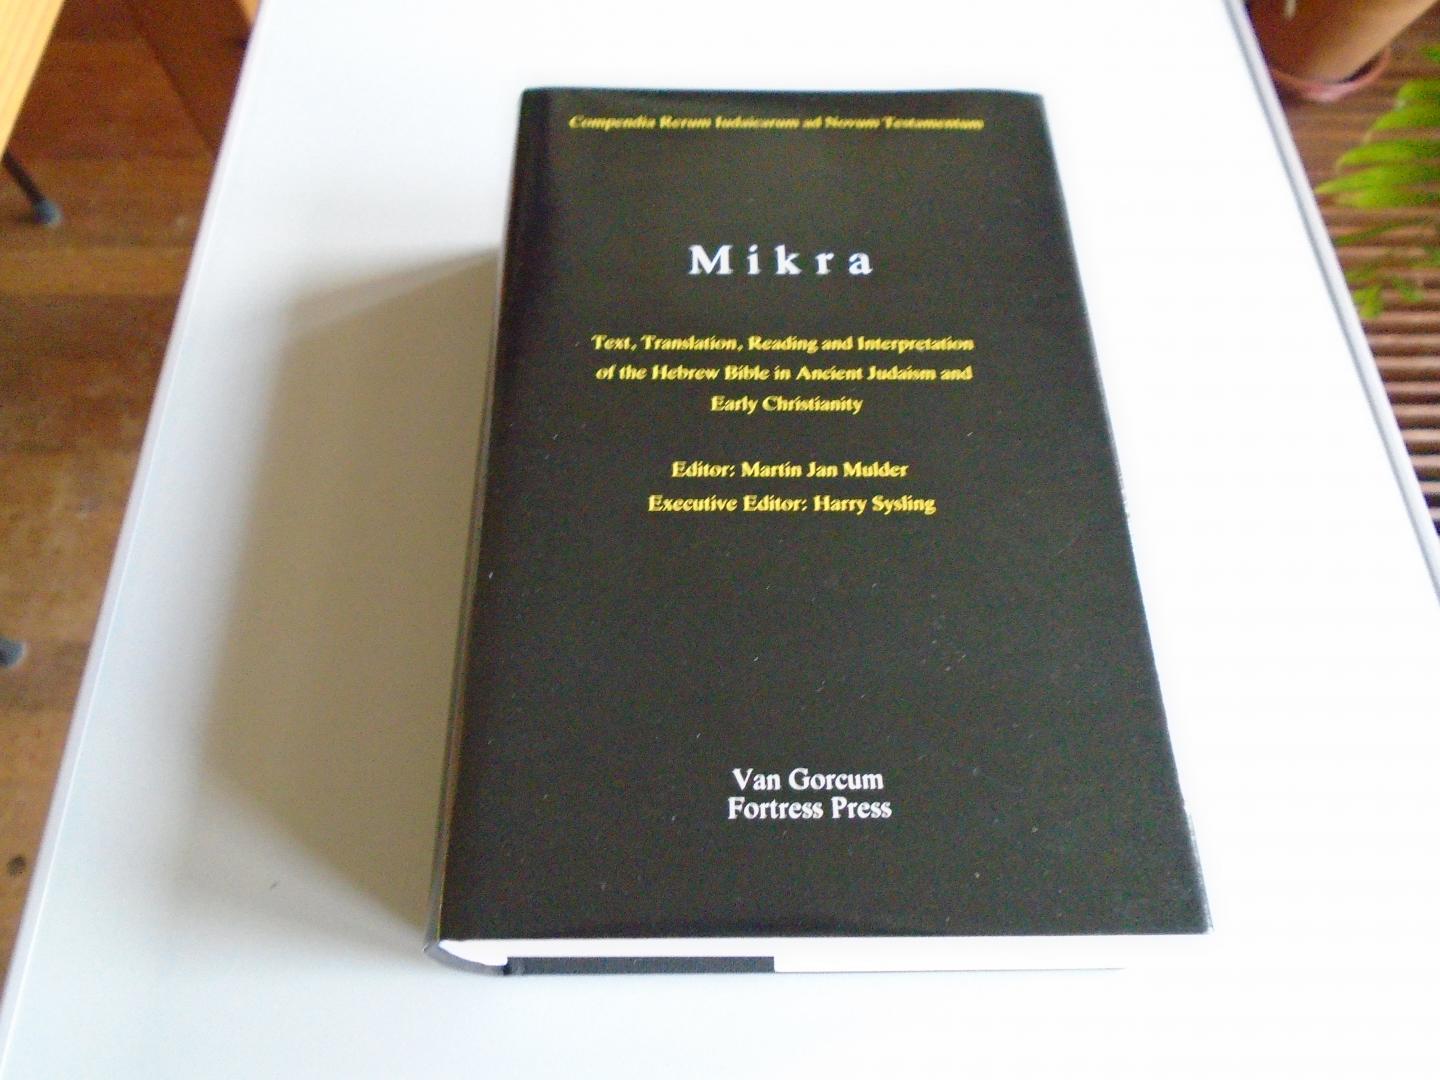 Mulder, Martin Jan / Harry Sysling (eds.) - Mikra. Text, Translation, Reading and Interpretation of the Hebrew Bible in Ancient Judaism and Early Christianity